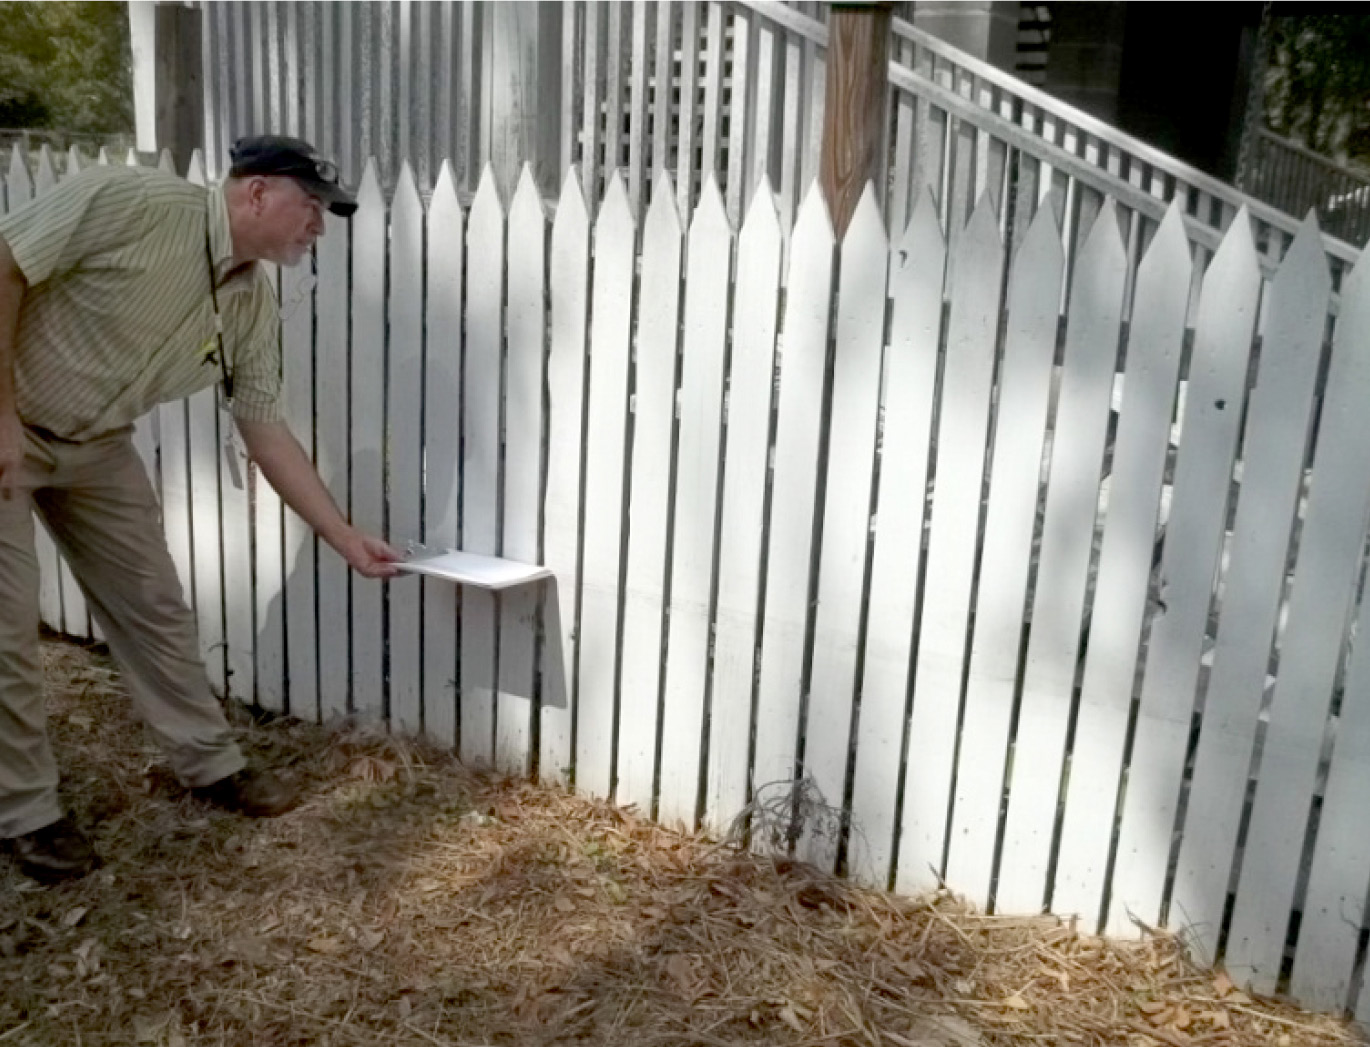 LAS team member measuring high water mark on a picket fence